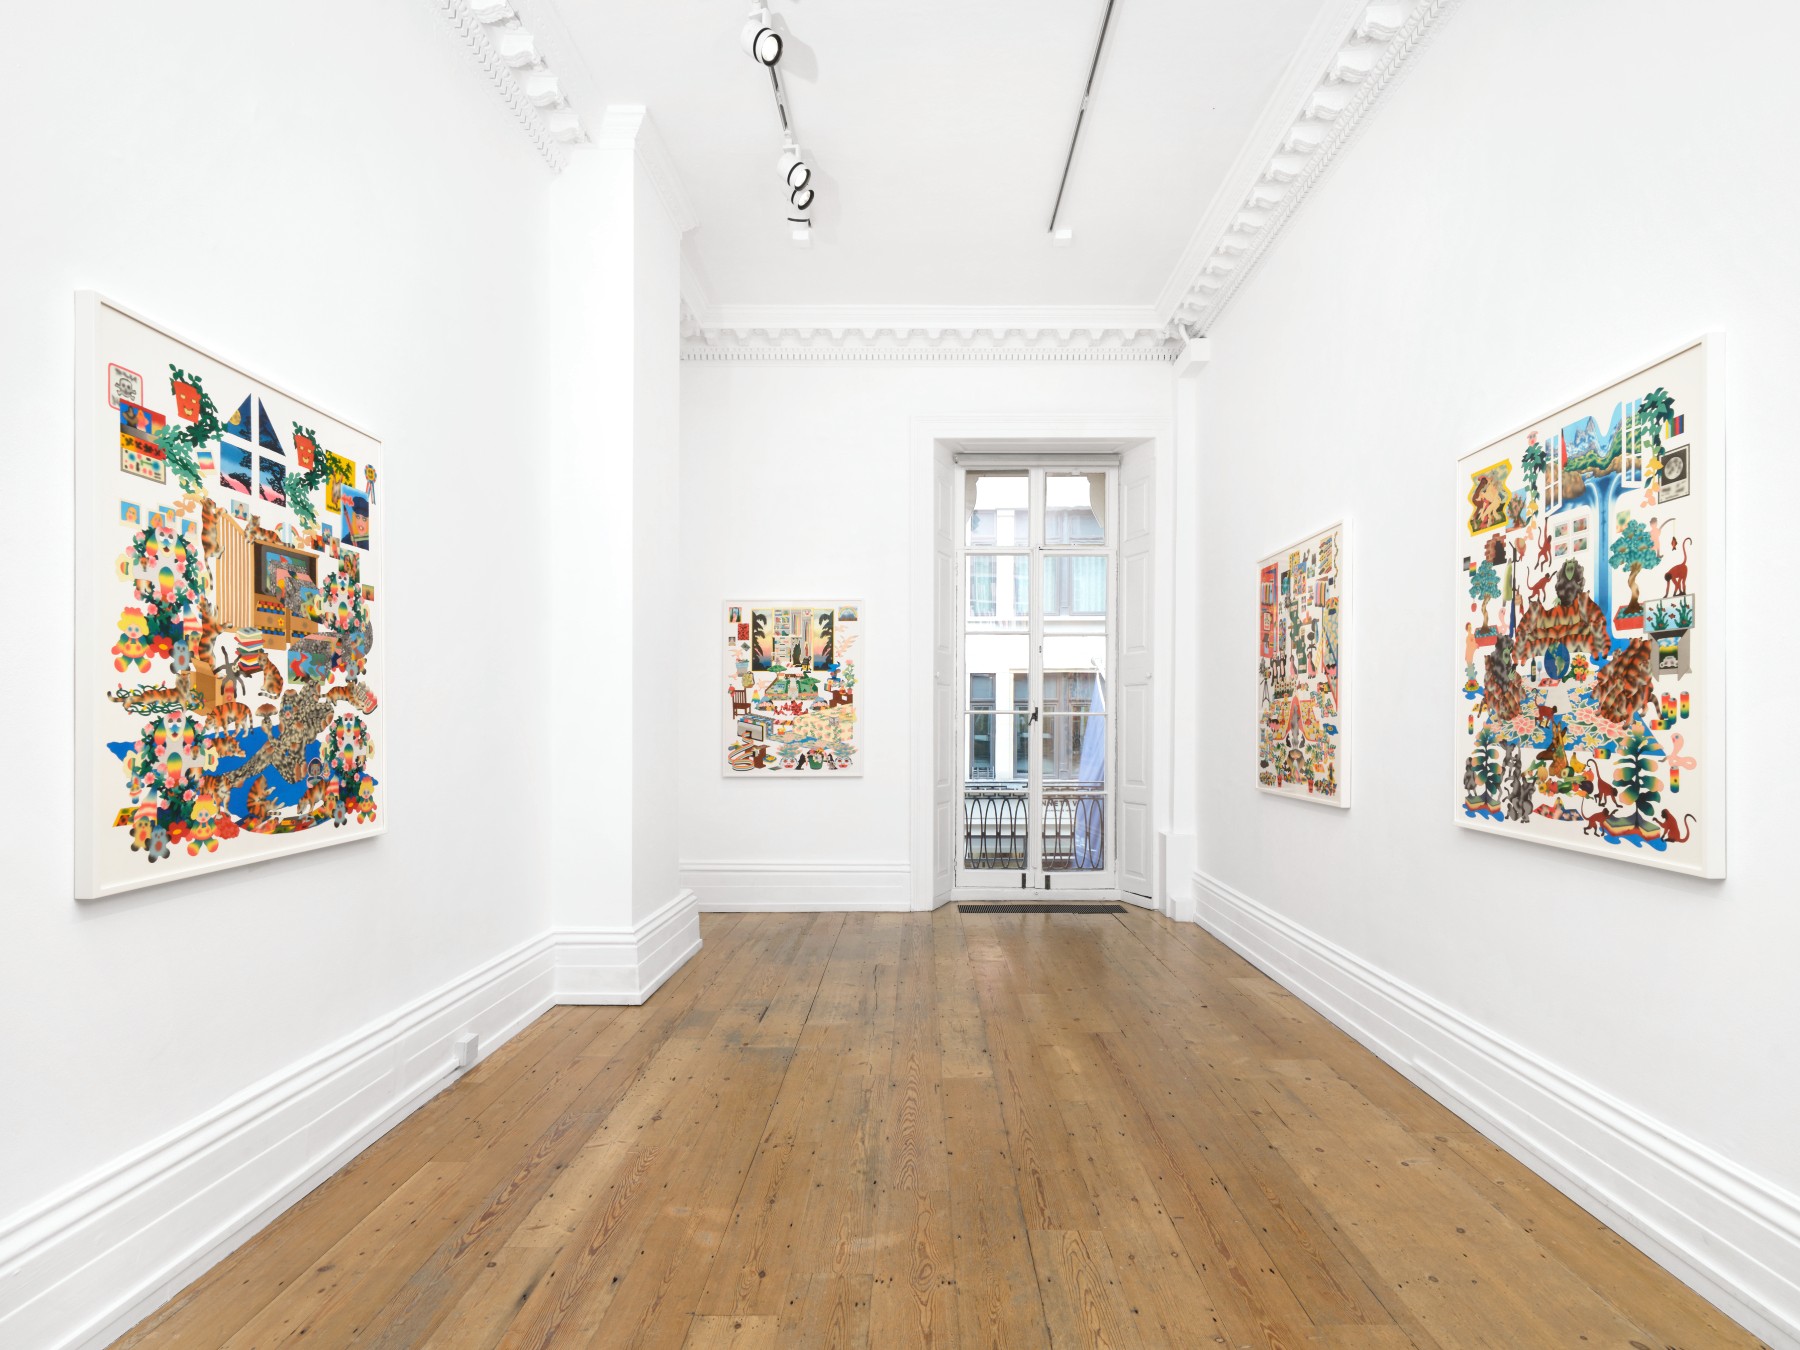 Installation image for Matthew Palladino: Down From The Mountain, at Carl Kostyál